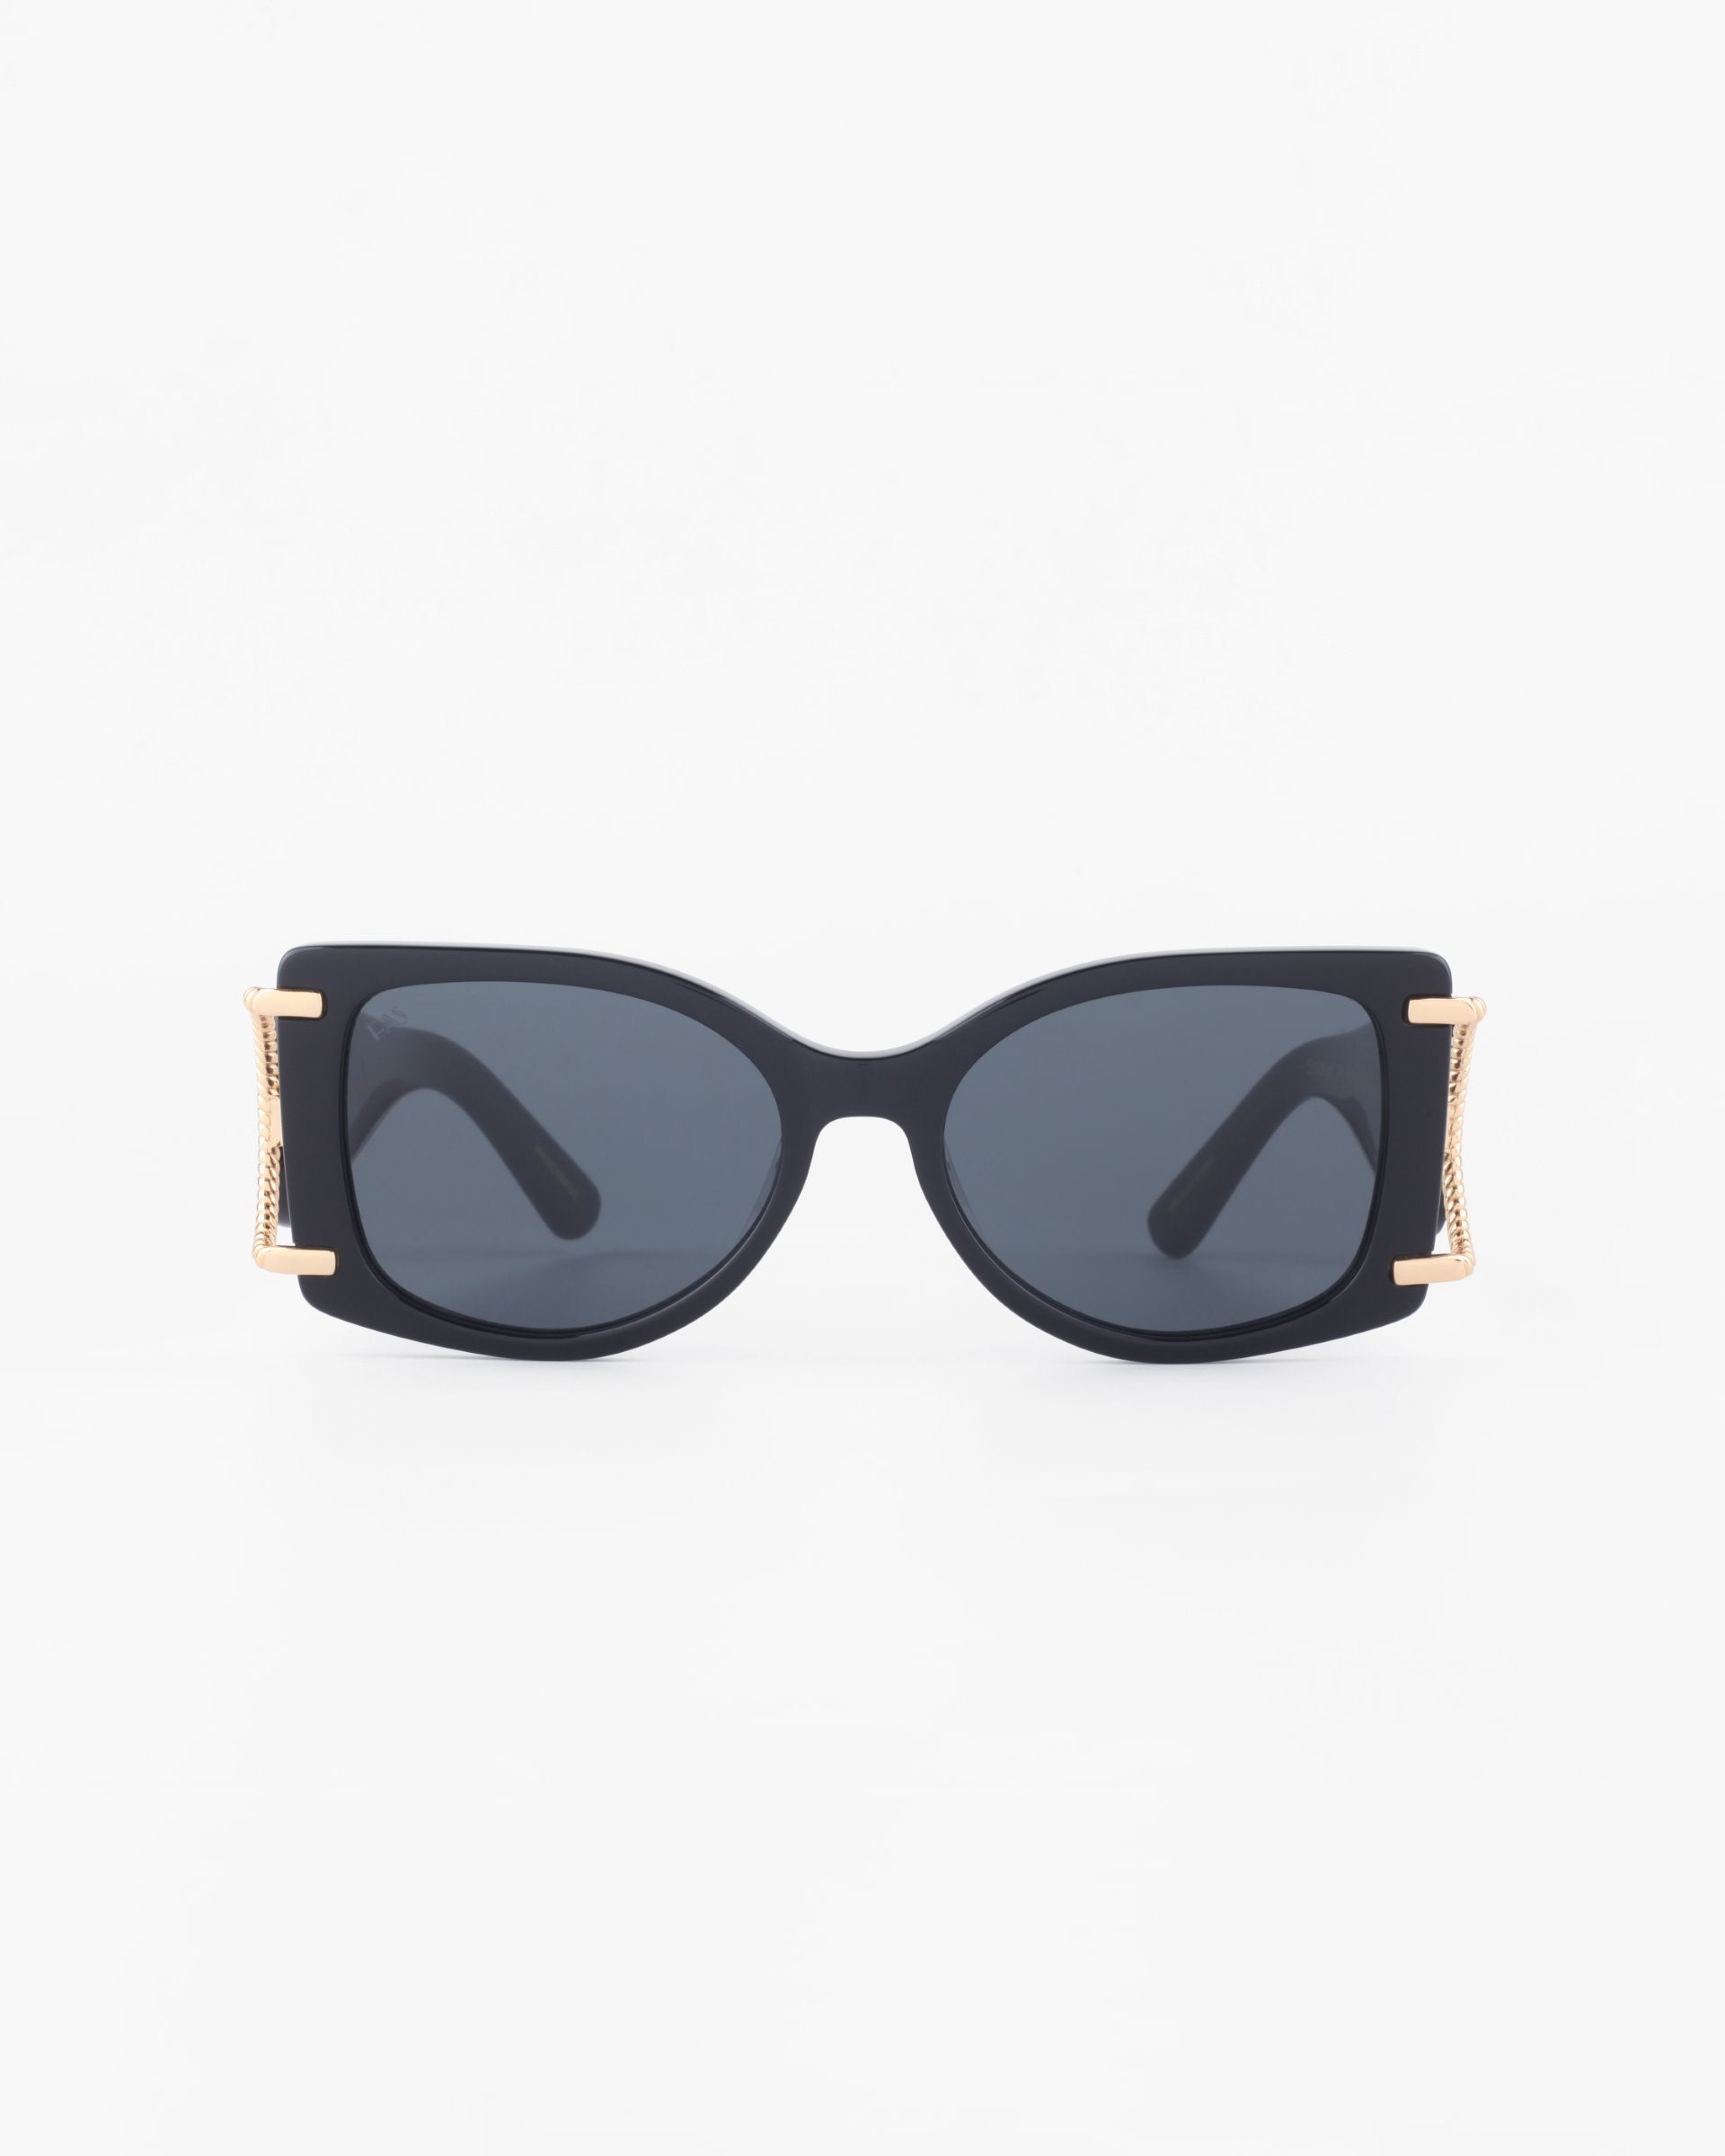 A pair of black rectangular acetate Sculpture sunglasses by For Art's Sake® with dark lenses. The frame features 18-karat gold-plated accents on the sides near the temples, adding an elegant touch. With 100% UVA & UVB protection, these stylish sunglasses stand out against a plain white backdrop.